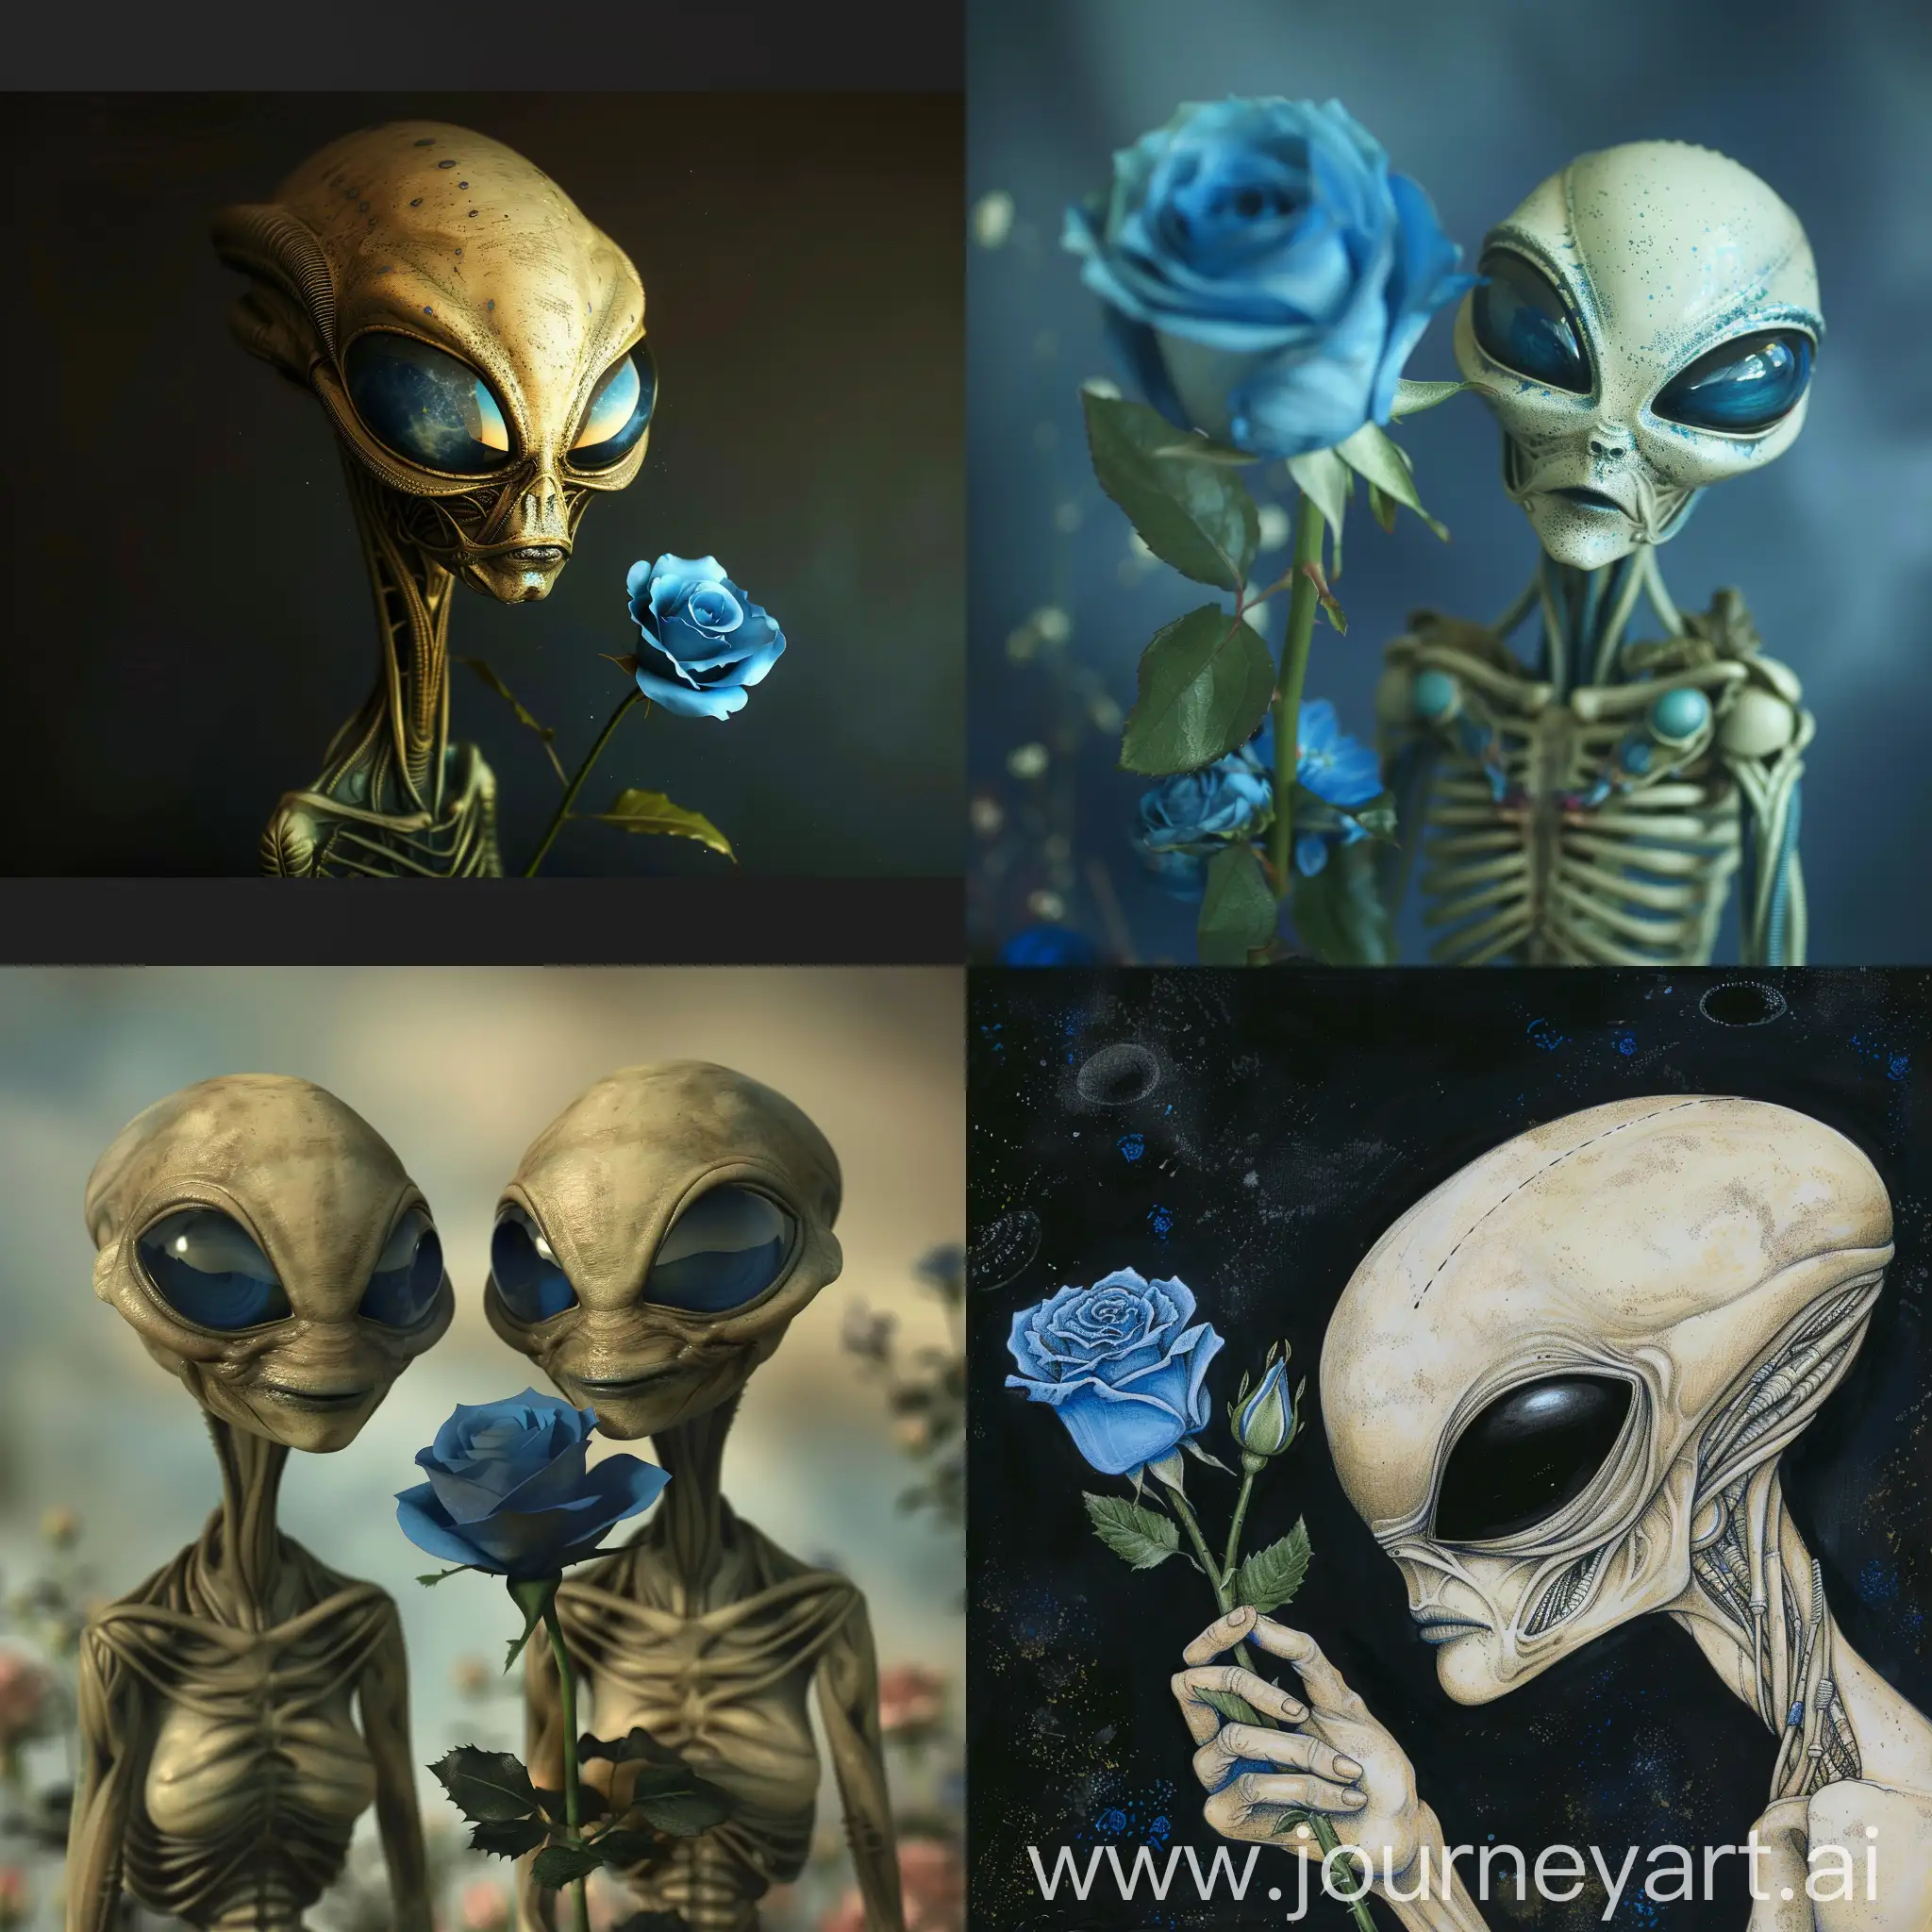 Extraterrestrial-Beings-Present-Blue-Roses-to-Women